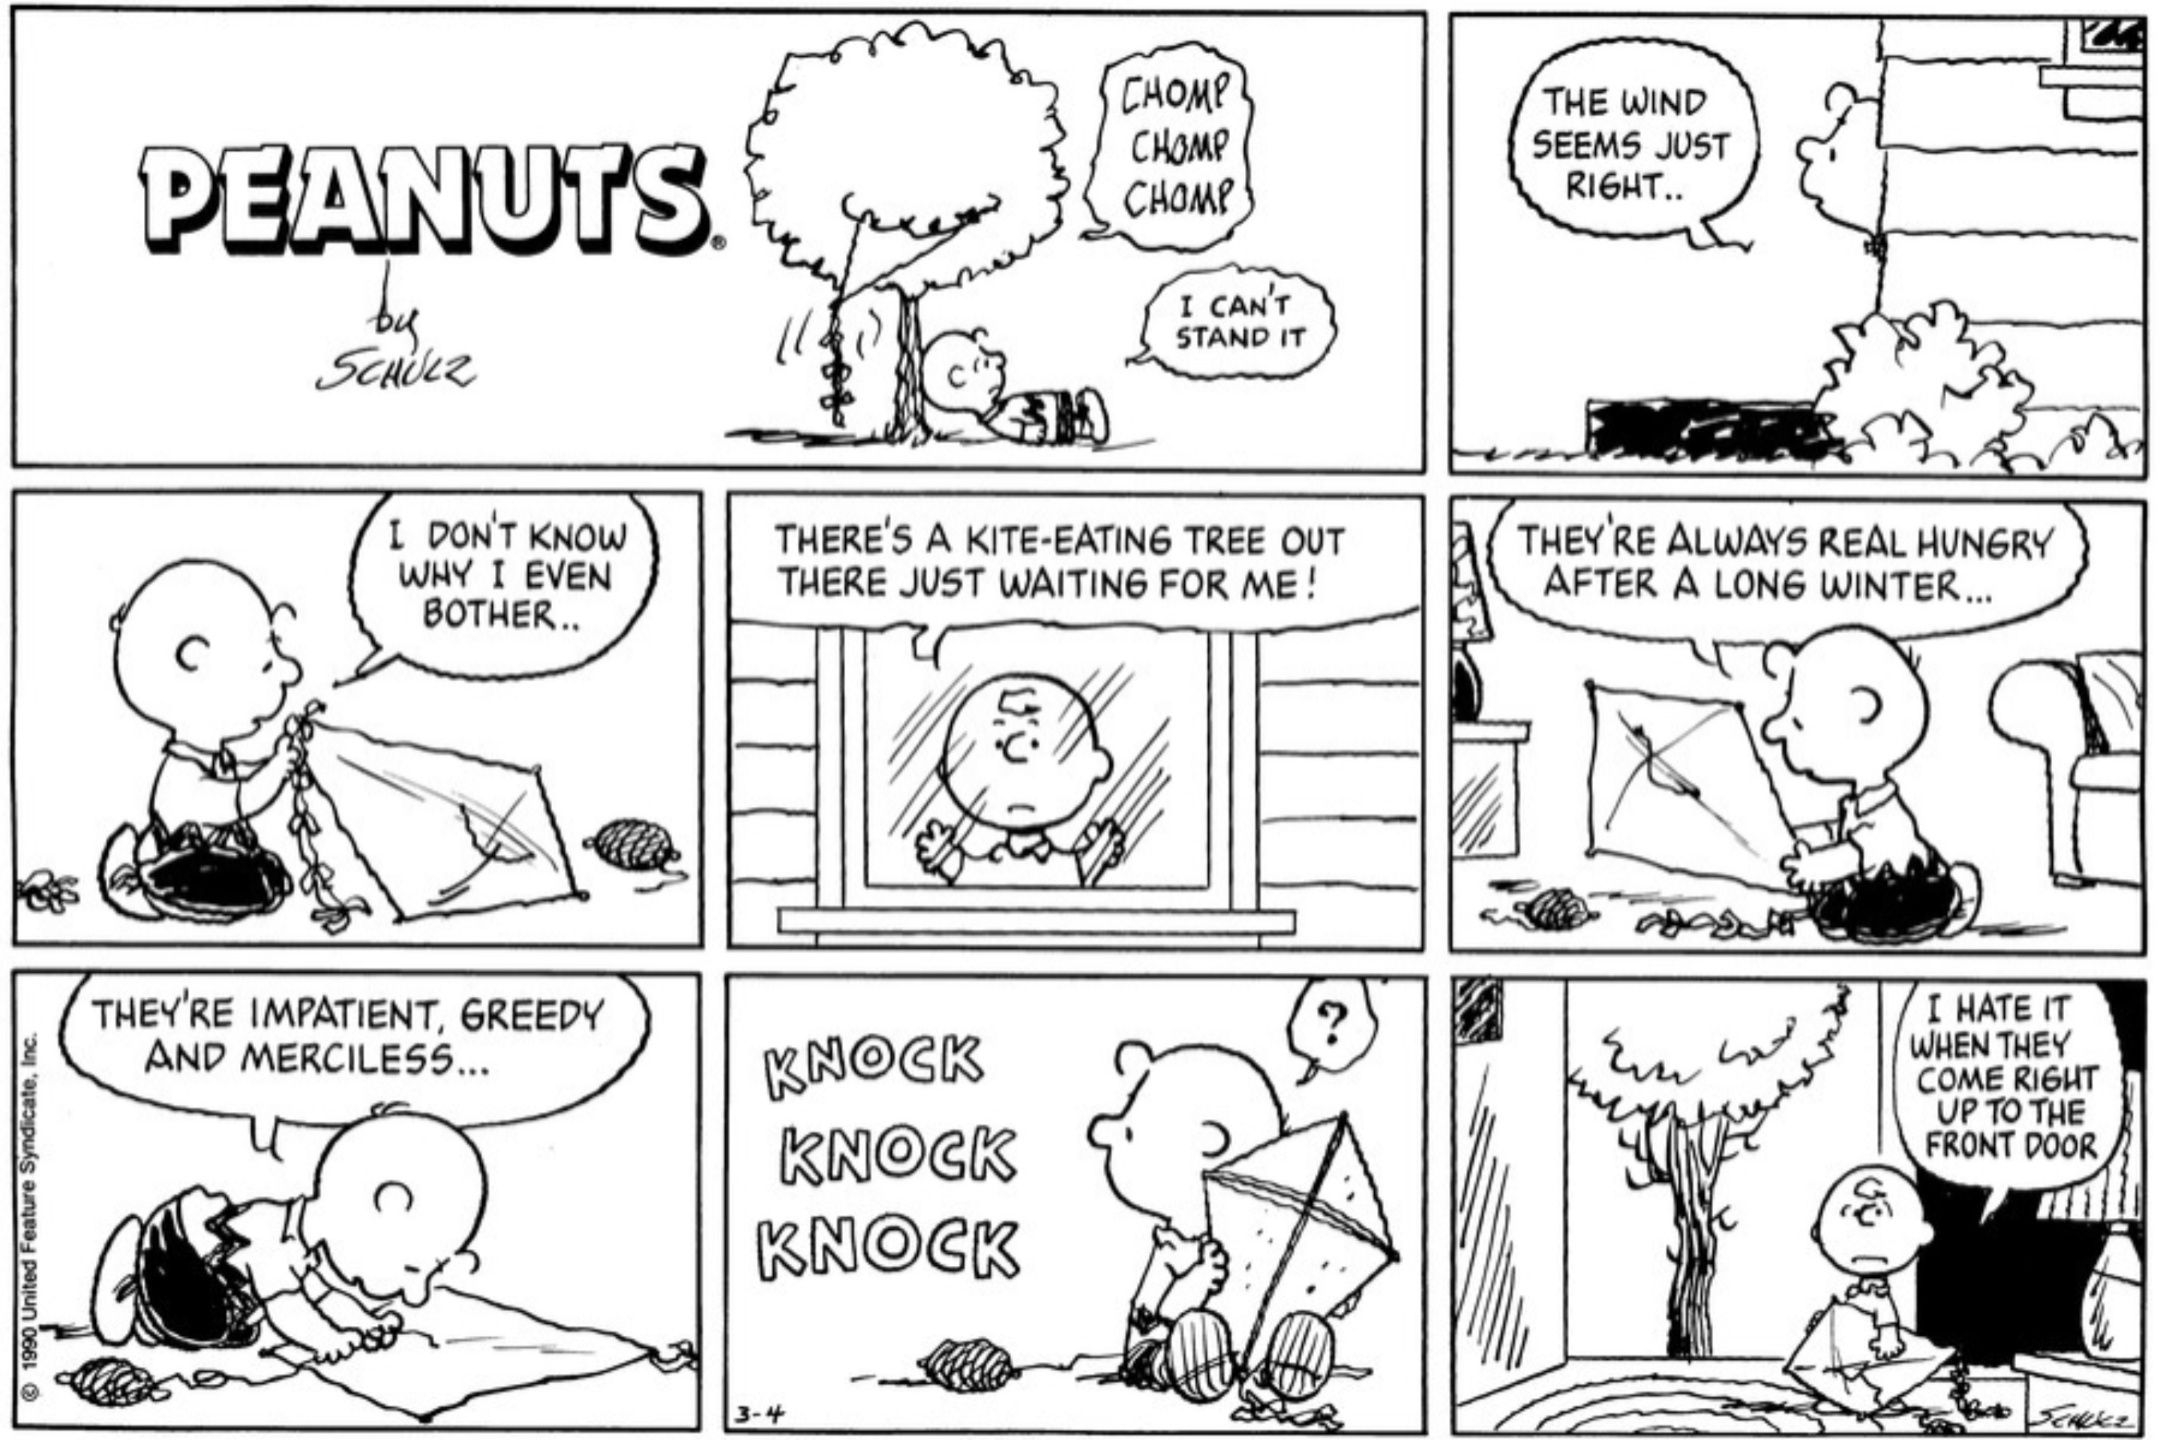 10 Funniest Peanuts Comics Where Charlie Brown Takes On The Kite-Eating Tree